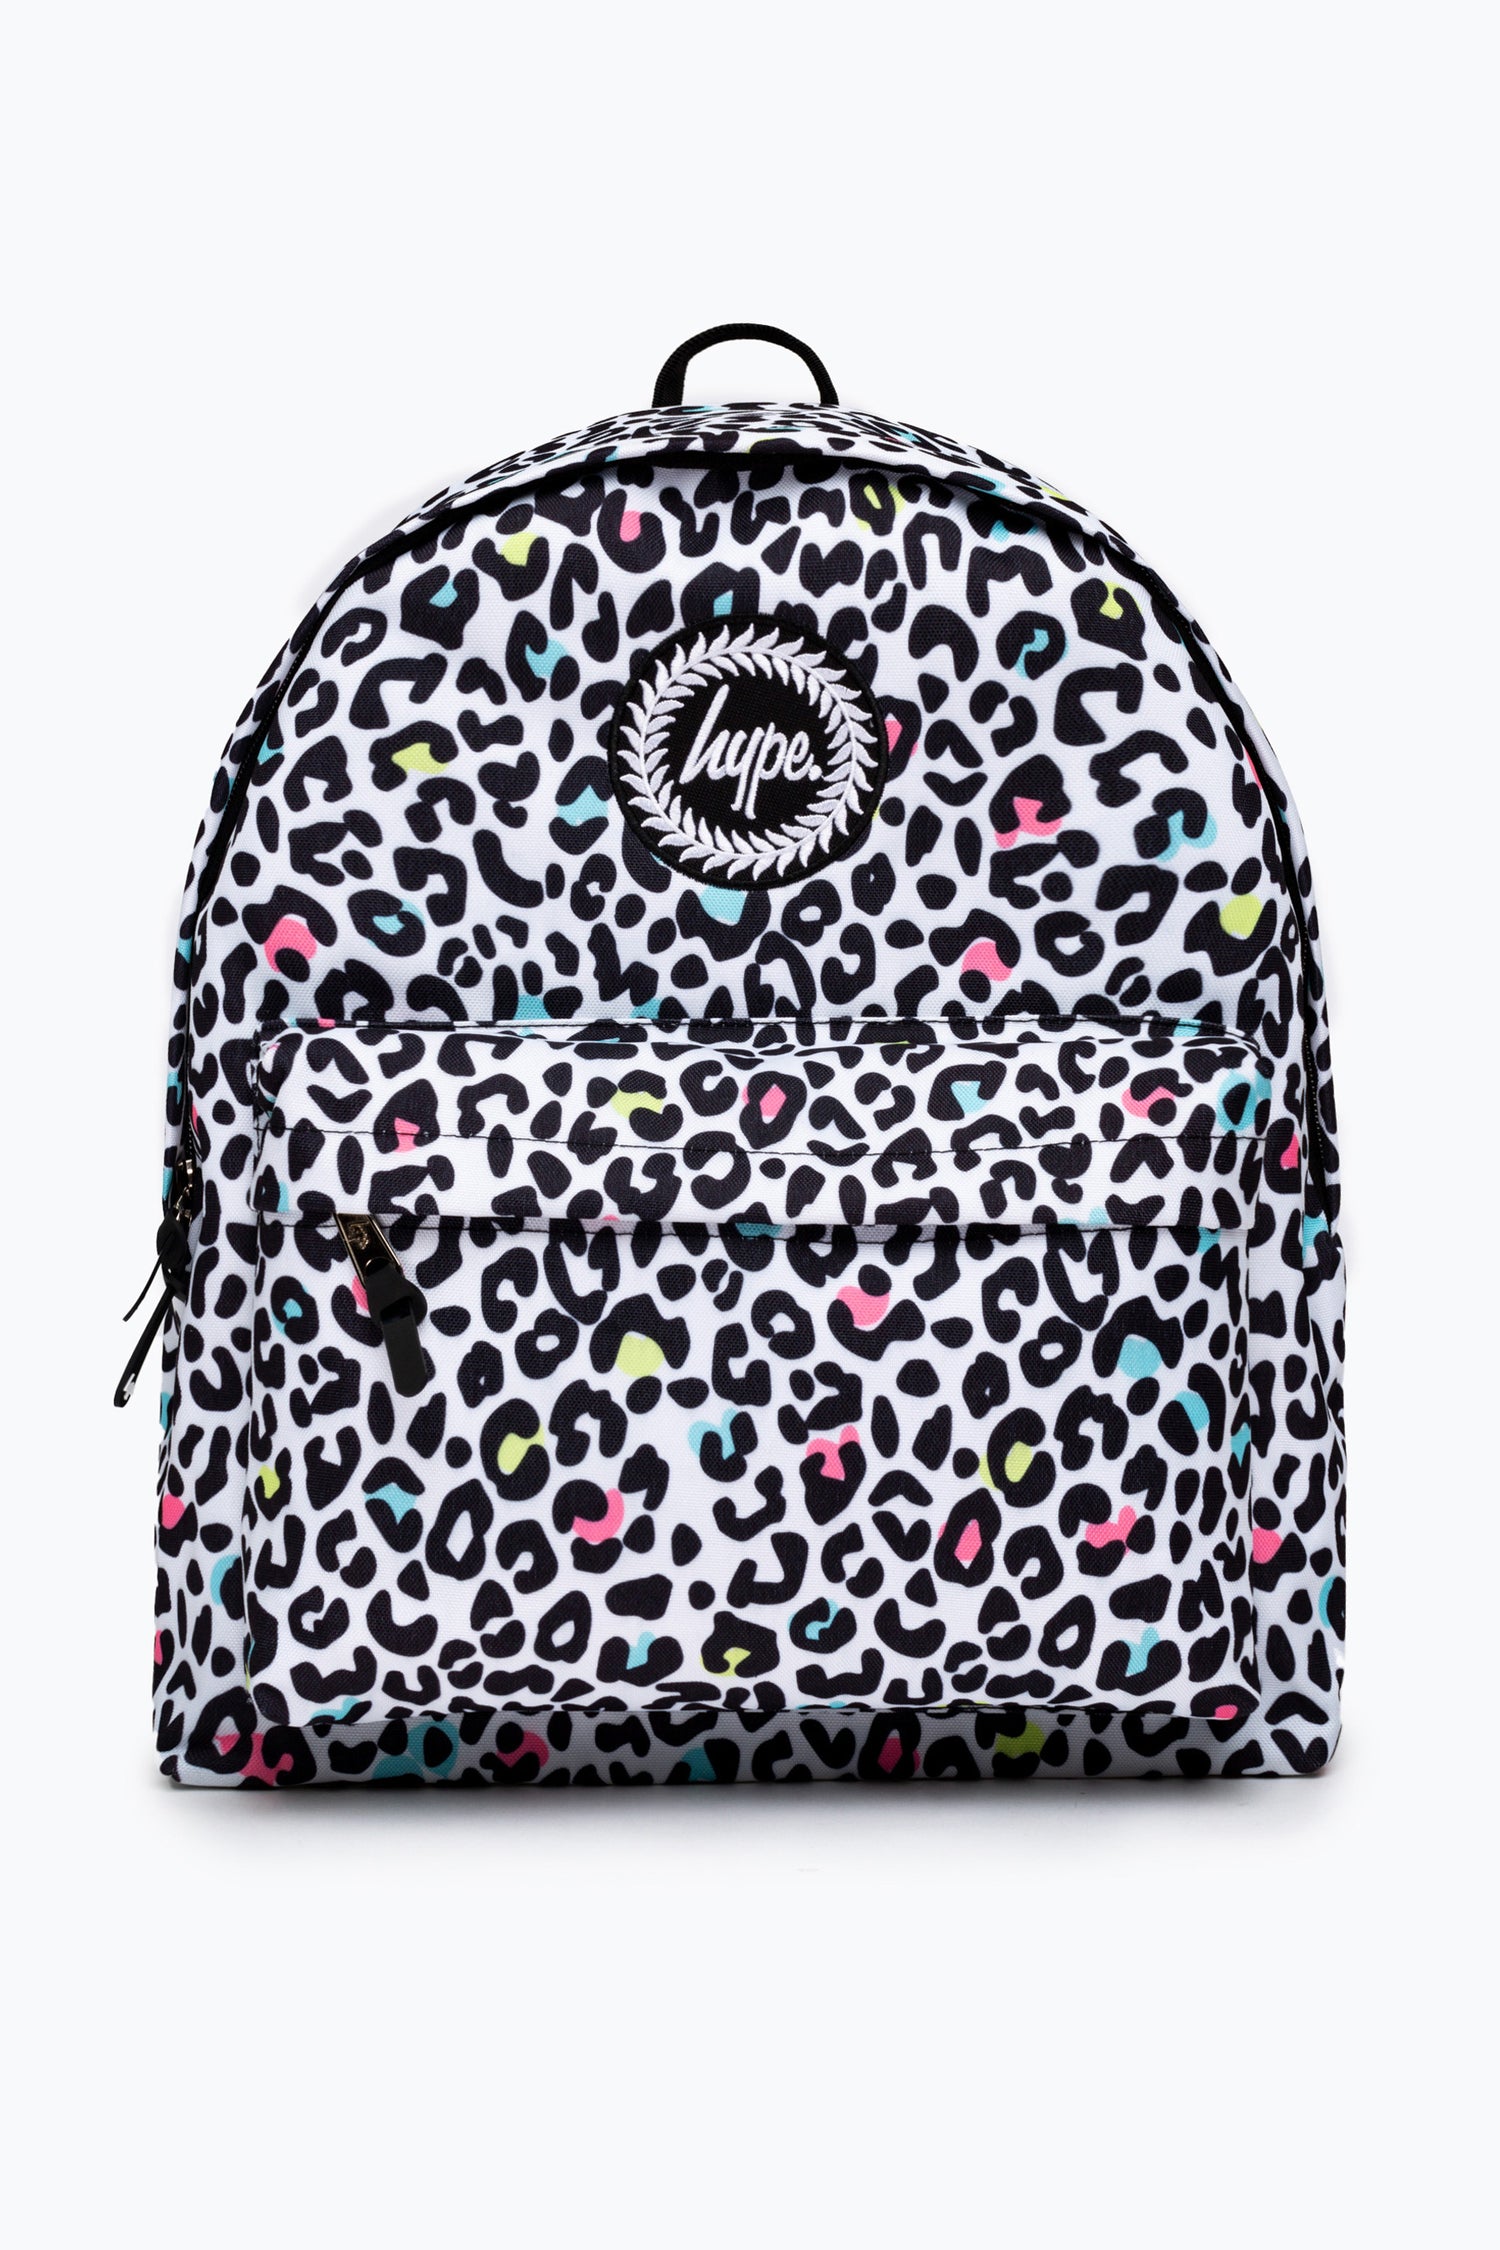 HYPE WHITE LEOPARD BACKPACK | Hype.